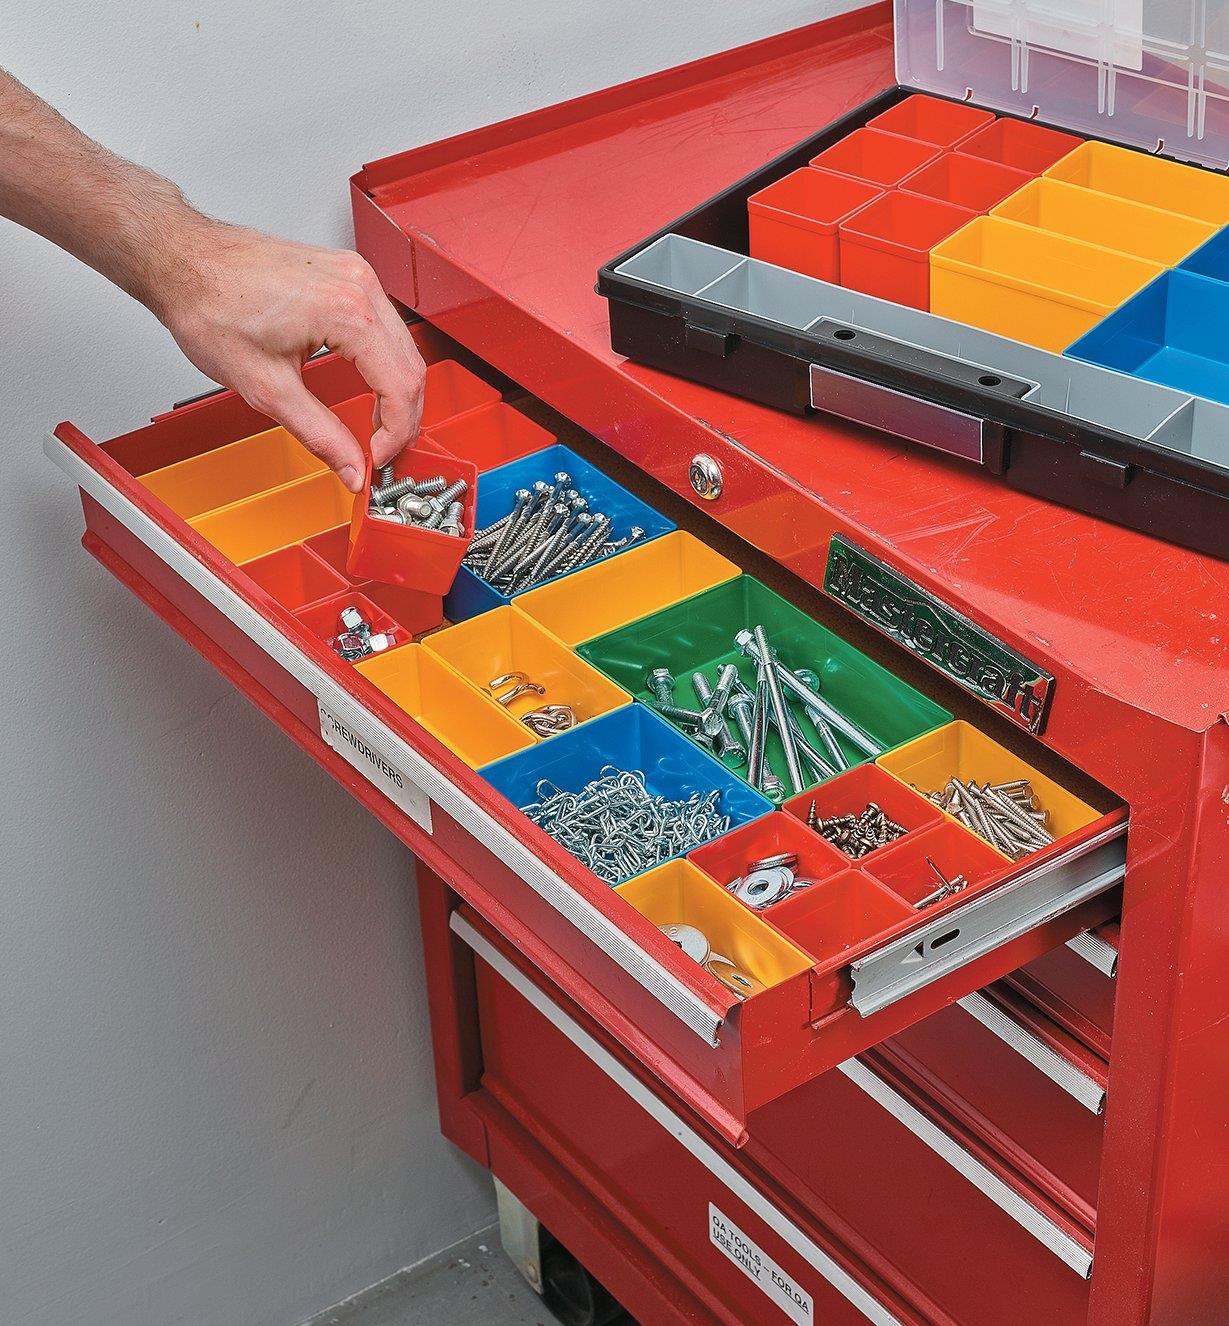 Allit Insert Bins arranged in a tool-chest drawer, holding various fasteners